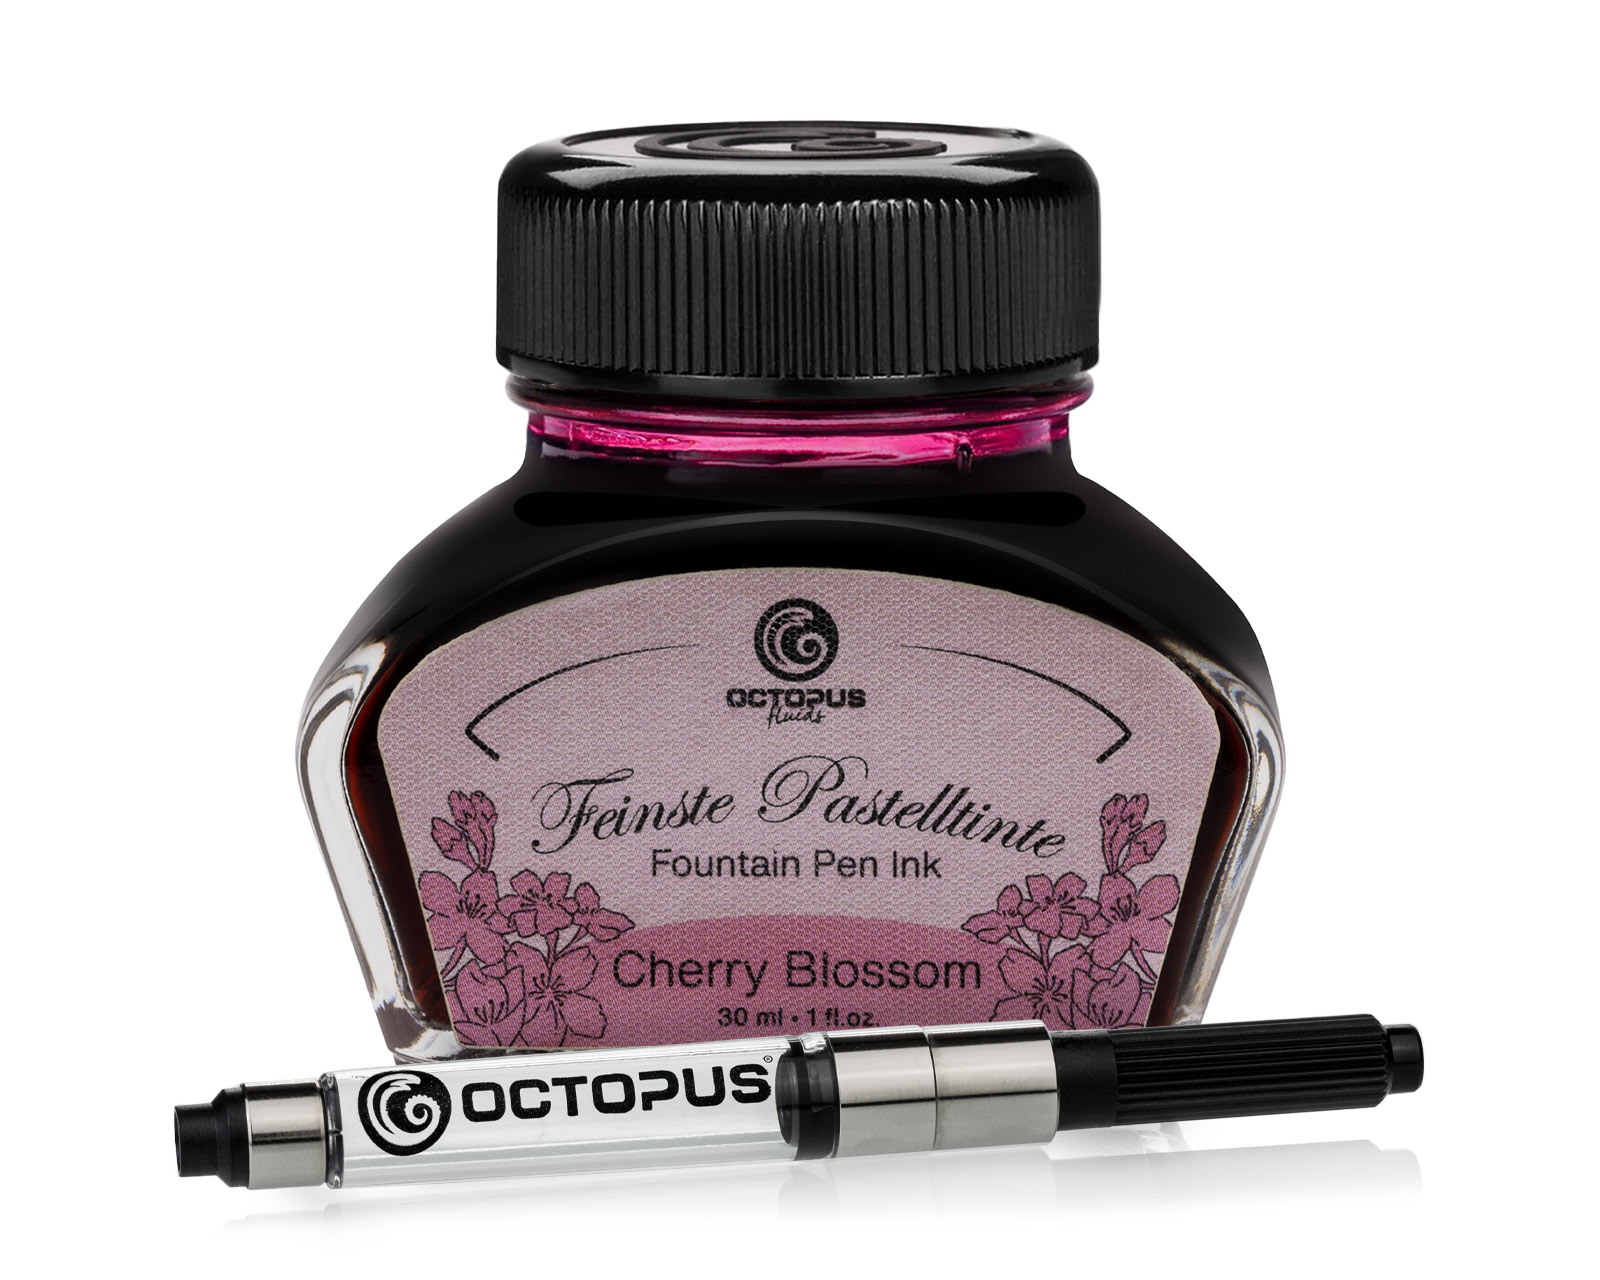 Fountain pen ink pastel "Cherry Blossom" including converter, Writing ink for fountain pen, 30ml